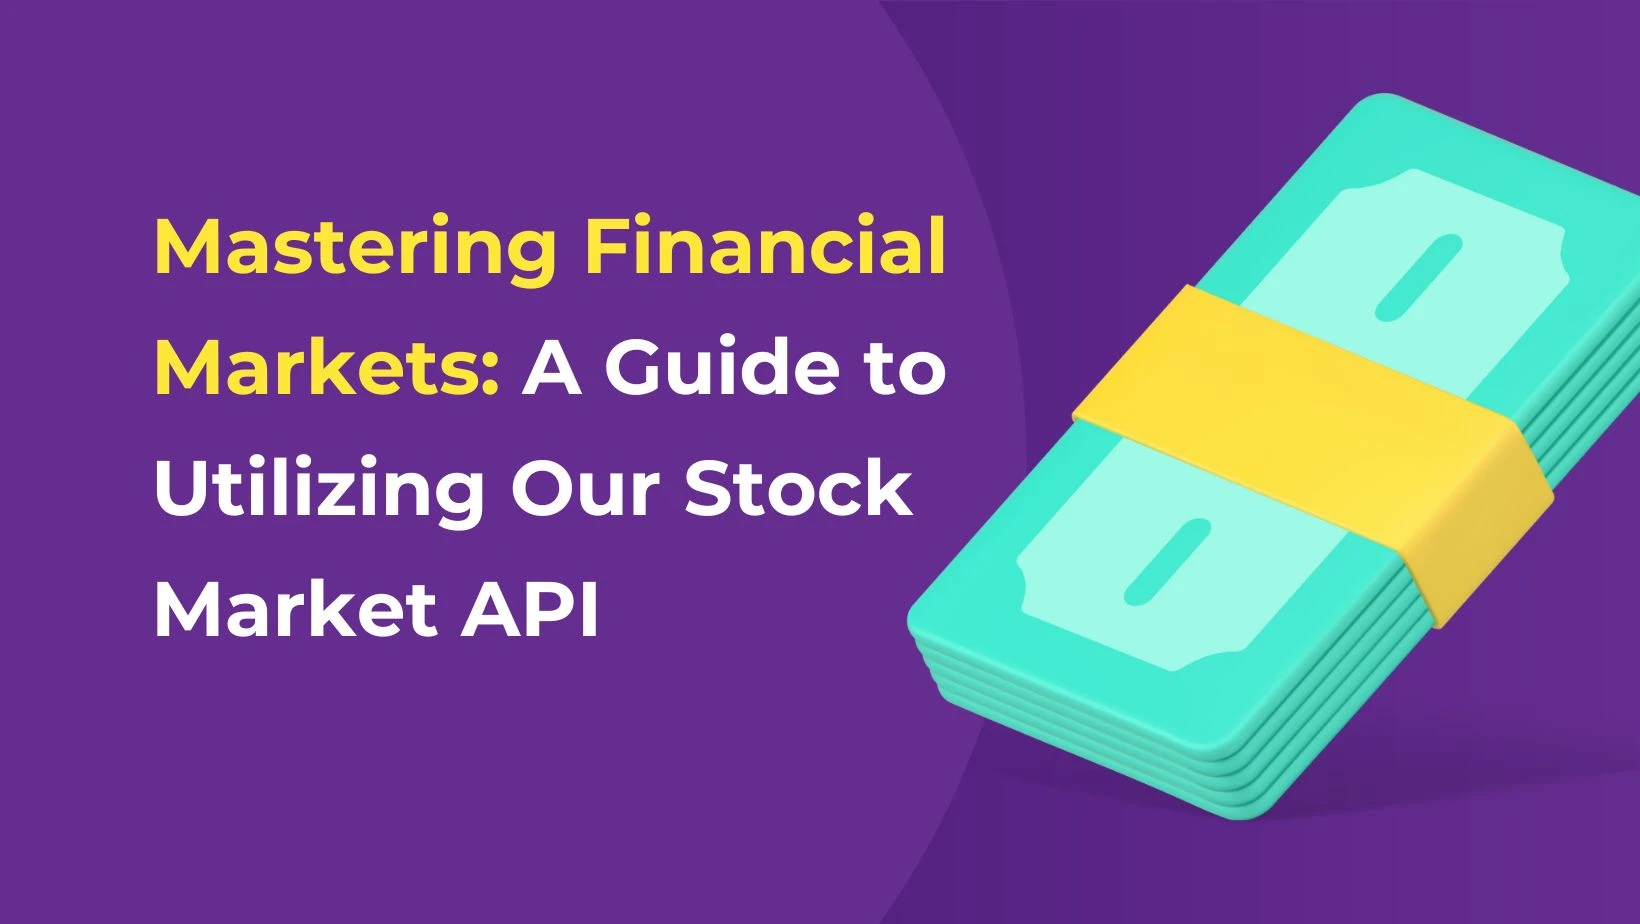 Mastering Financial Markets: A Guide to Utilizing Our Stock Market API